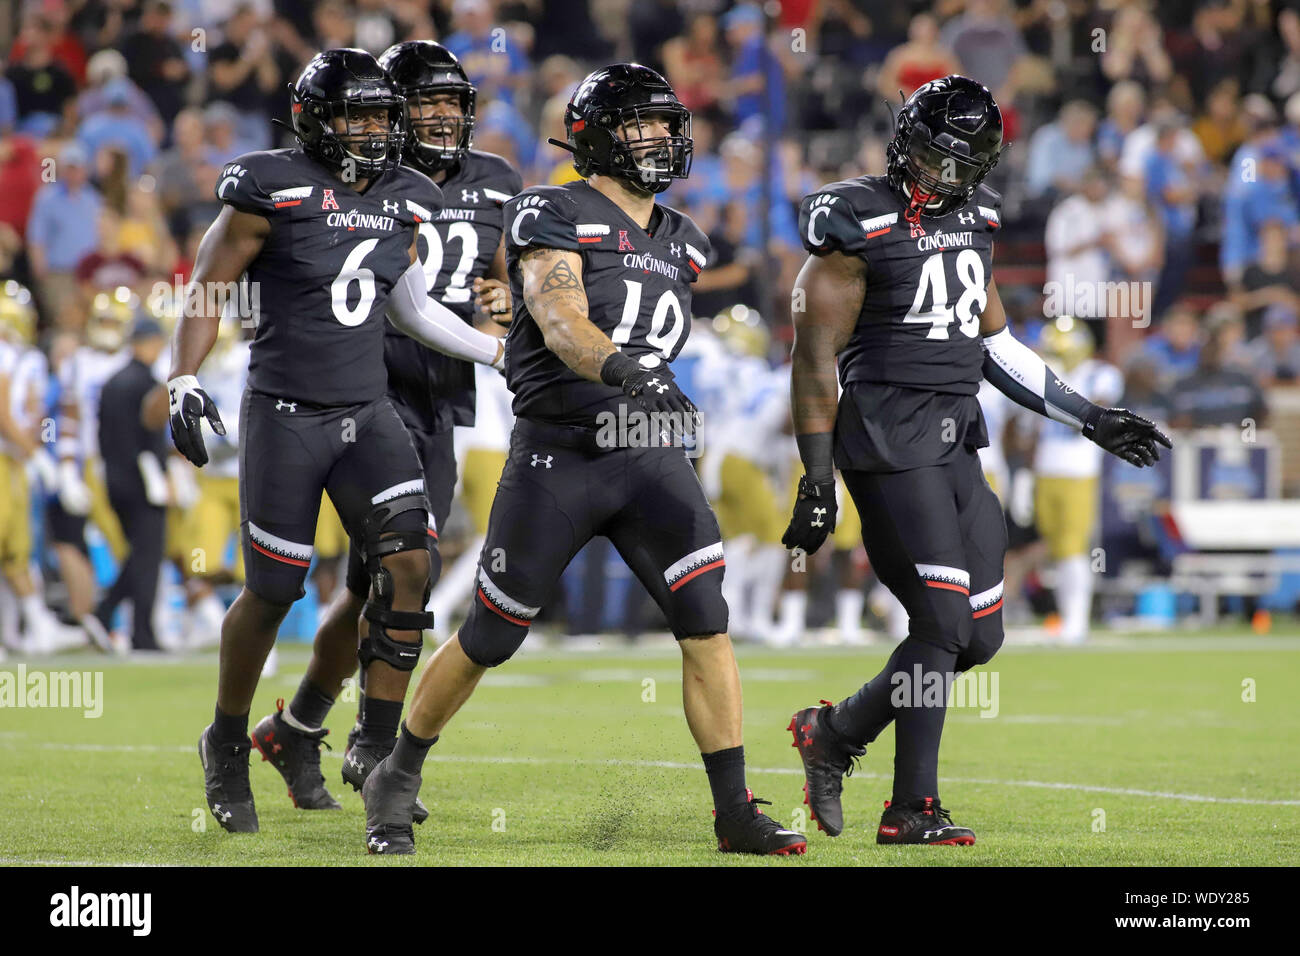 August 29, 2019: Cincinnati's Ethan Tucky (19) struts to celebrate his sack with teammates Perry Young (6) and Kevin Mouhon (48) during an NCAA football game between the Cincinnati Bearcats and the UCLA Bruins at Nippert Stadium in Cincinnati, Ohio. Kevin Schultz/CSM Stock Photo